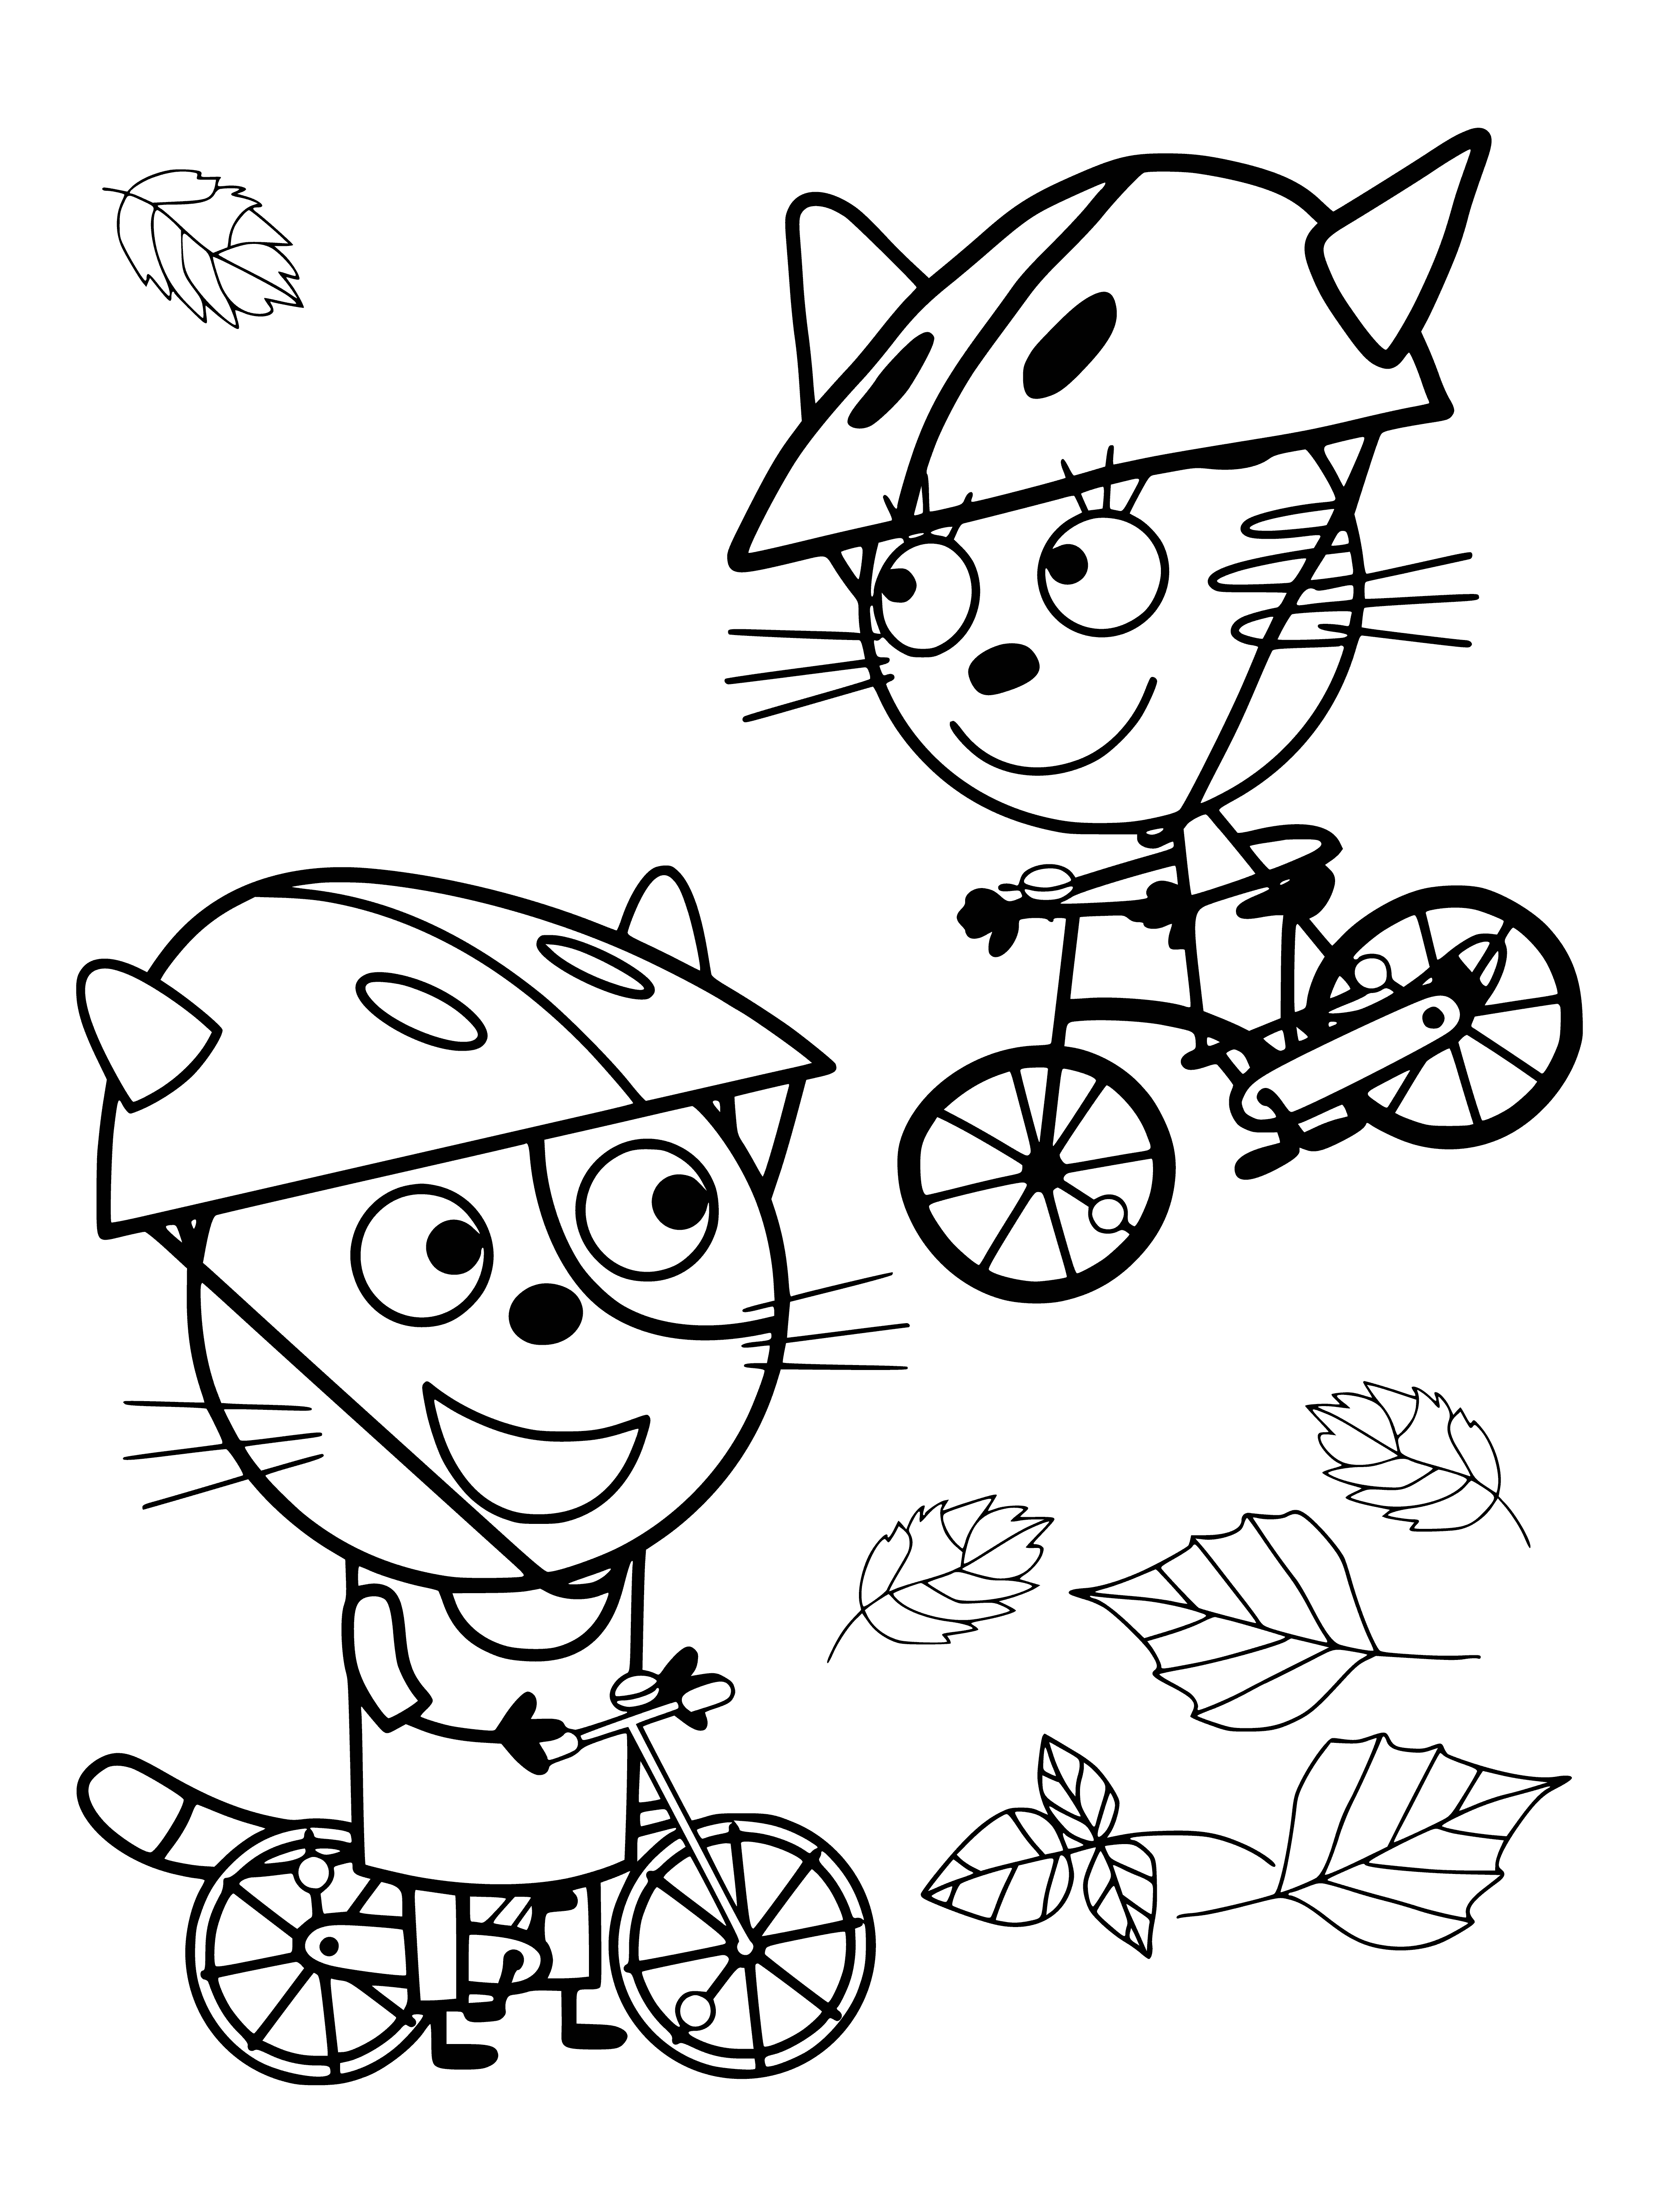 coloring page: Two cats, Chase and Caramel, ride bicycles while the third sits on a fence in the background in this black & white coloring page.